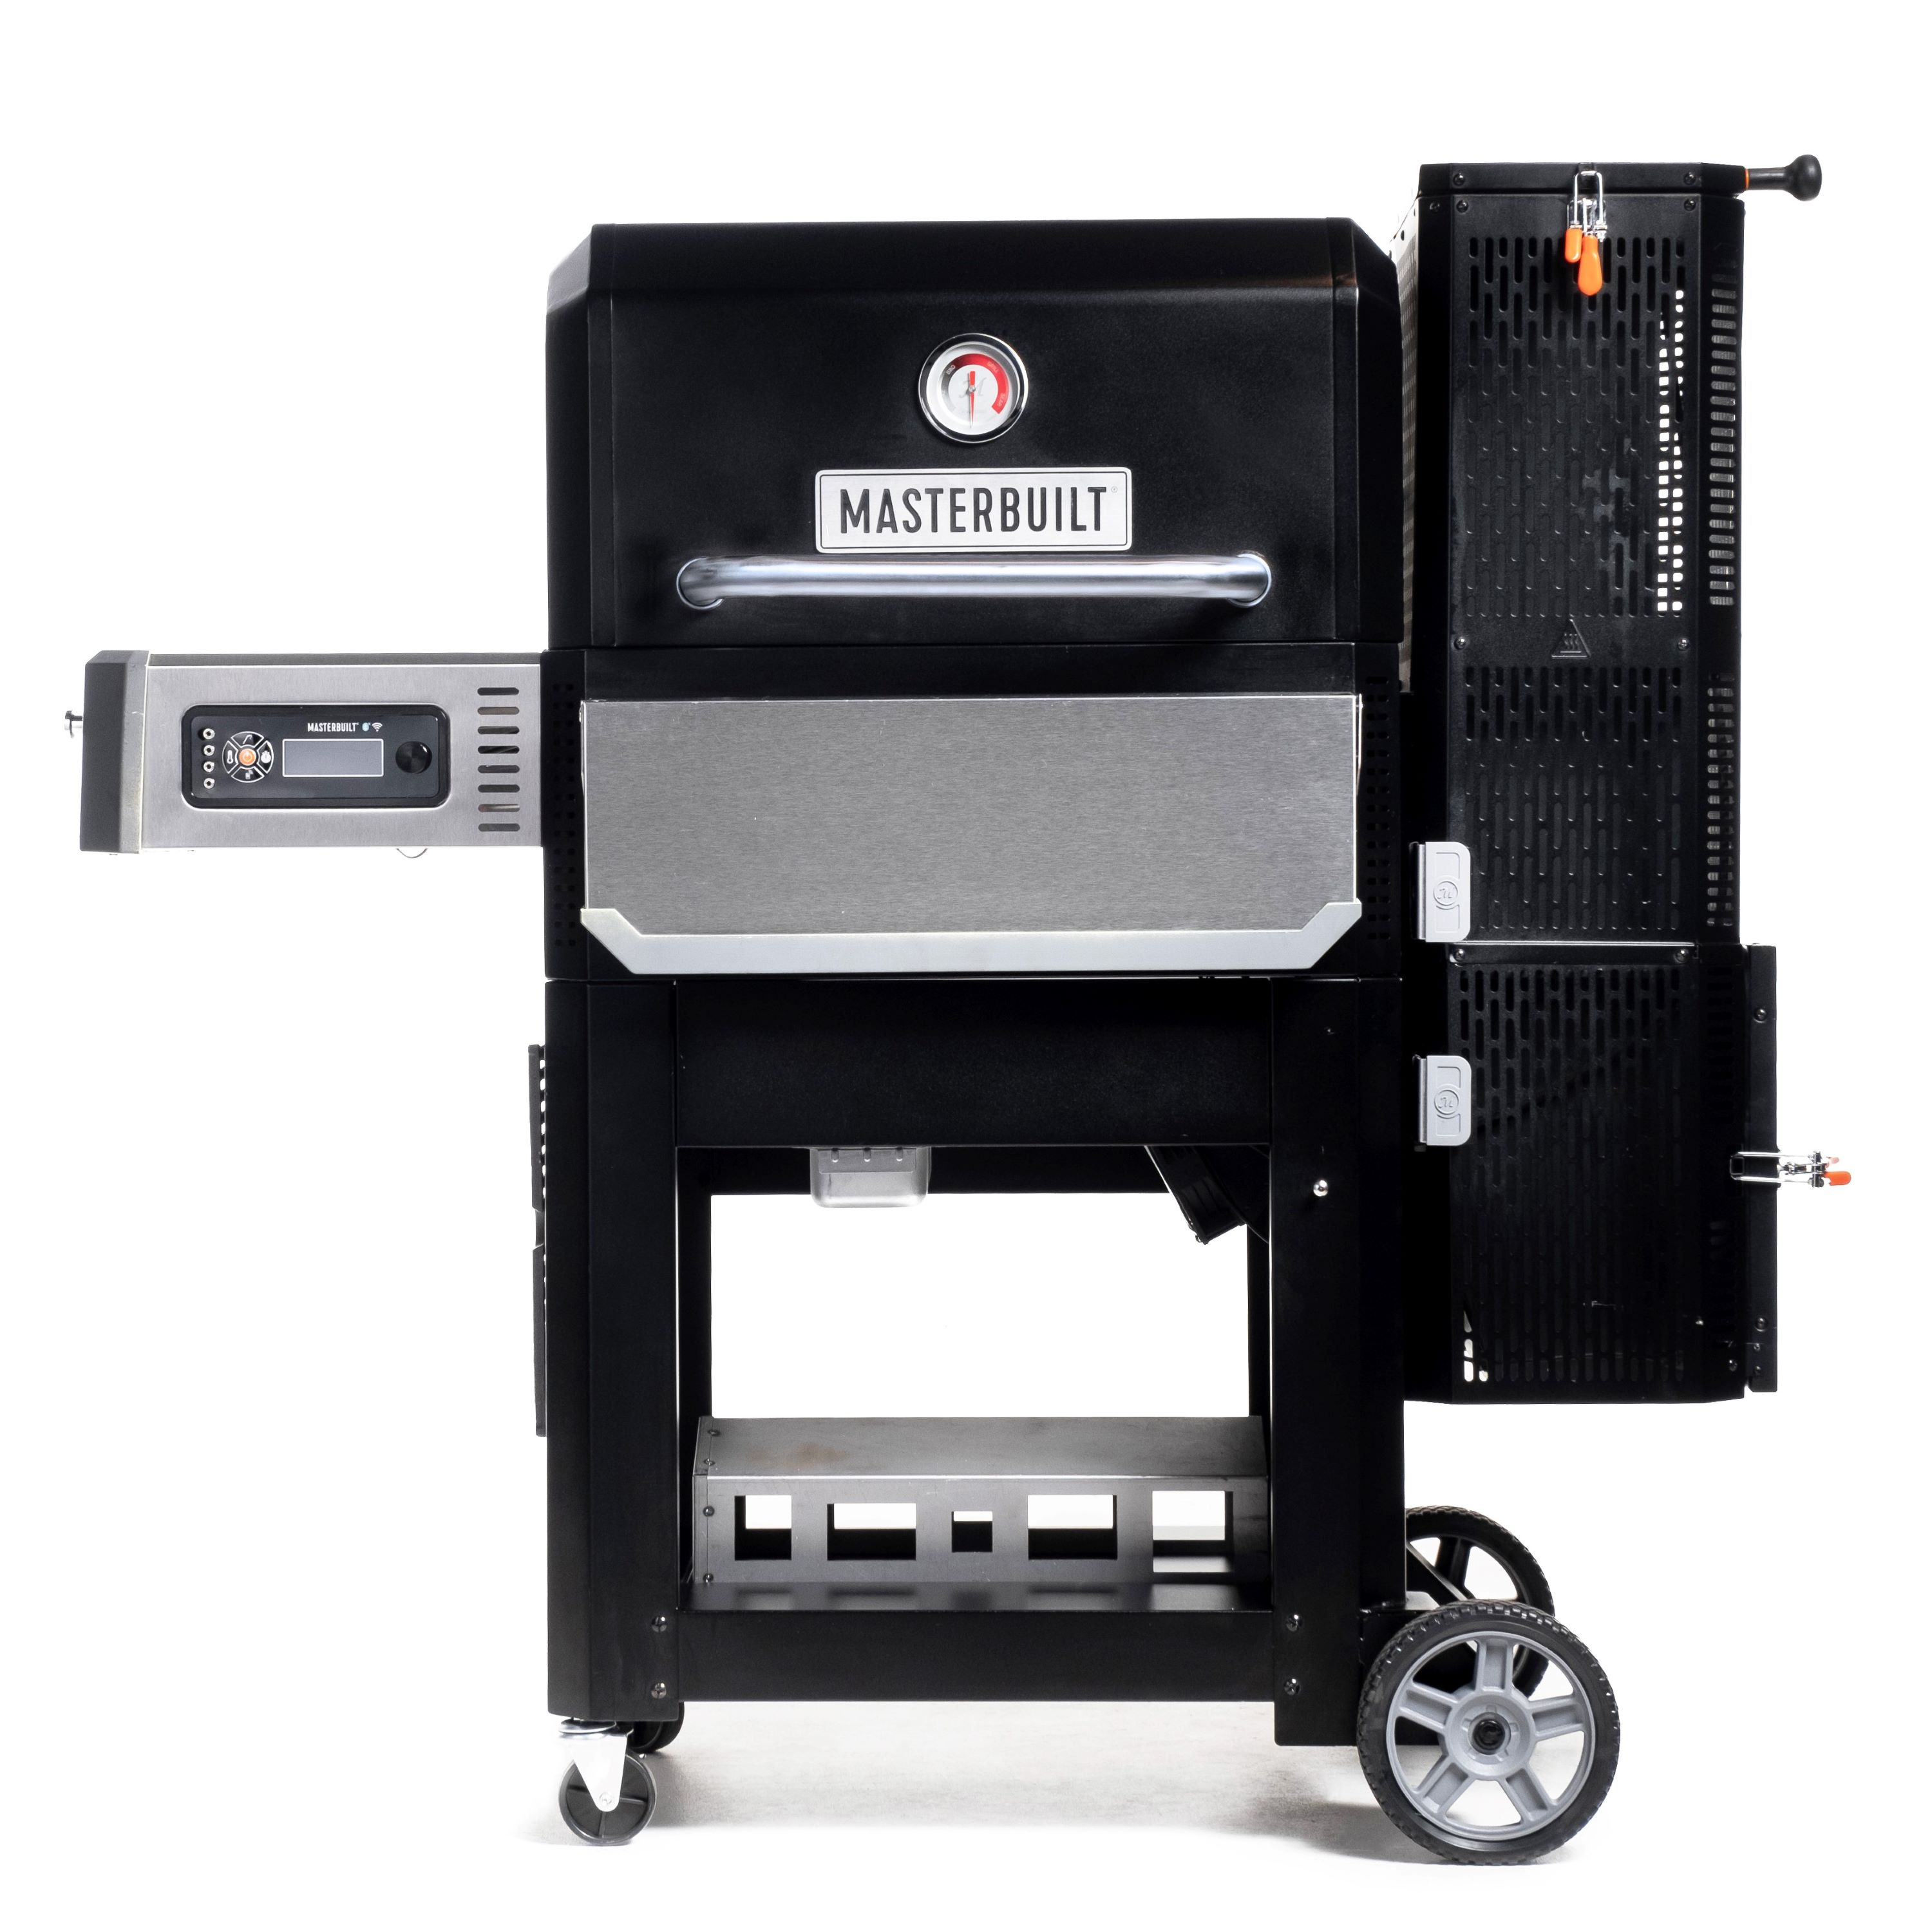 Masterbuilt Gravity Series 800 Digital WiFi Charcoal Grill, Griddle and Smoker in Black - image 1 of 6